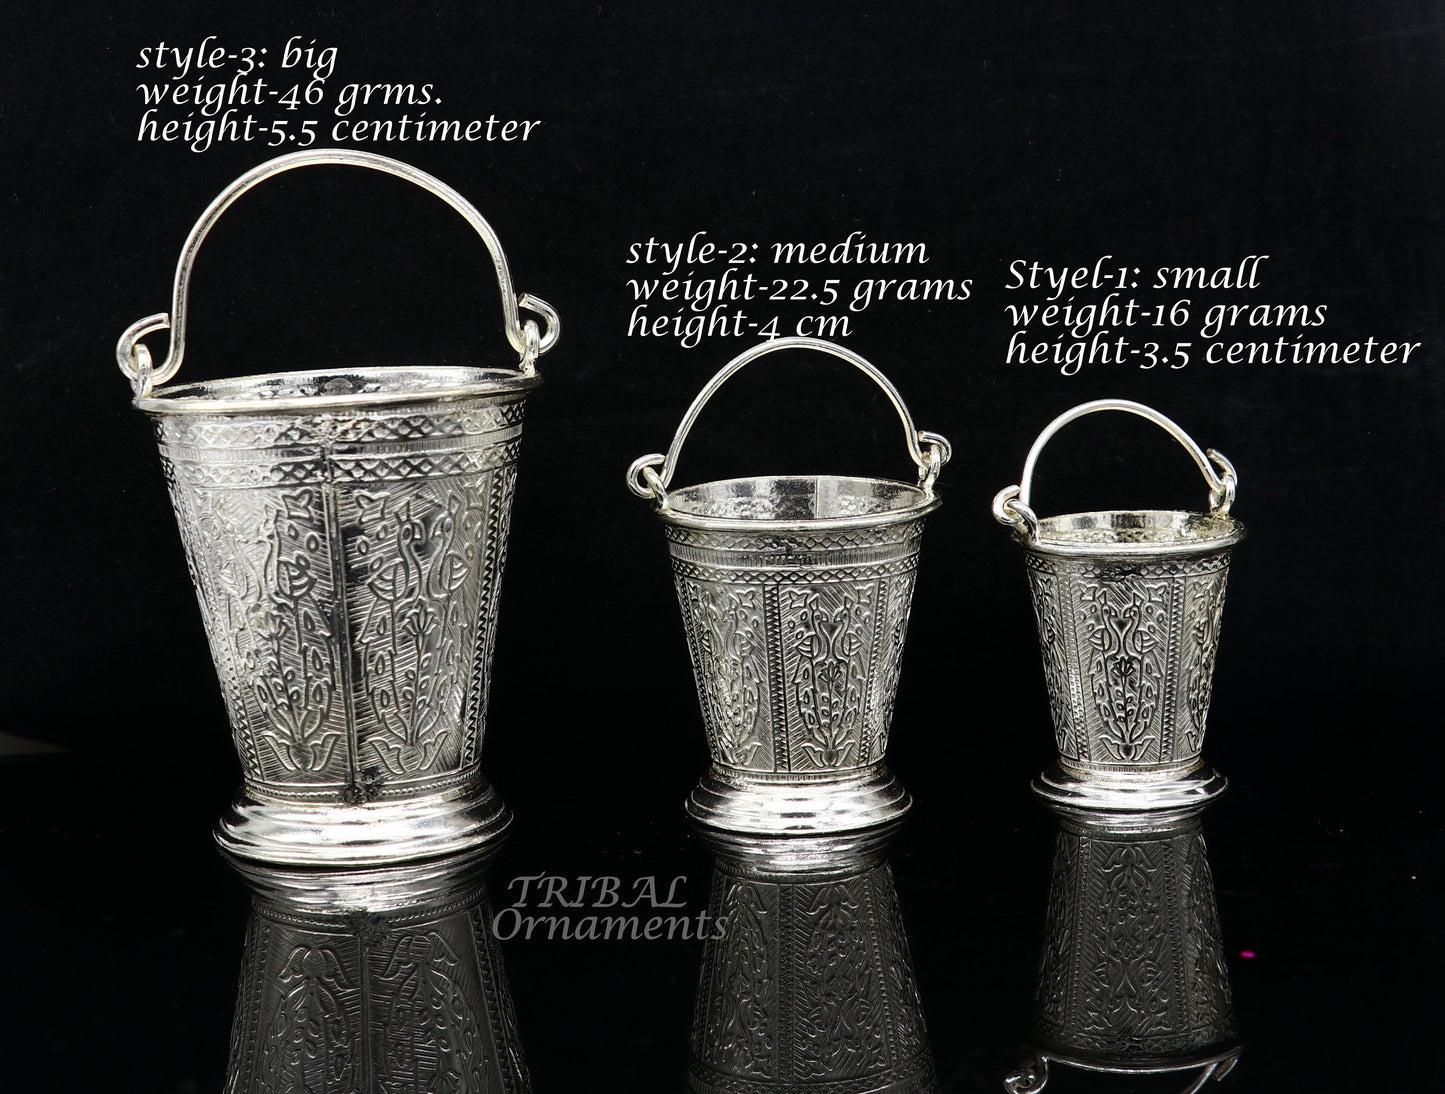 925 sterling silver handmade fabulous vintage style bucket toy for puja or worshipping, Diwali puja article utensils su976 - TRIBAL ORNAMENTS